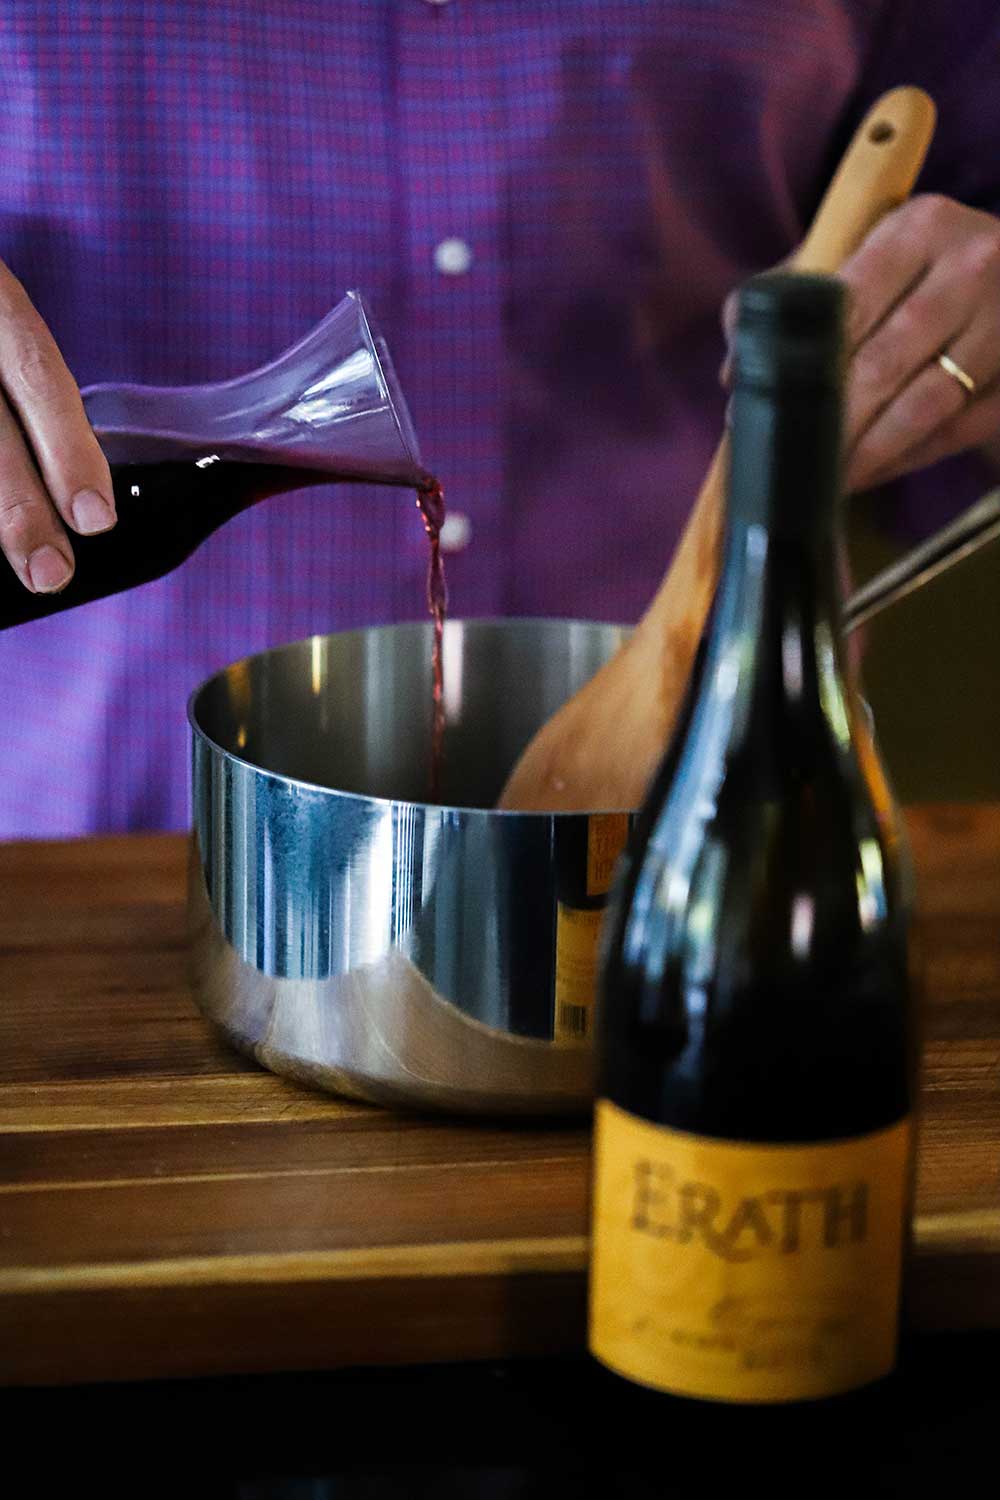 A person pouring red wine from a carafe into a silver sauce pan all in front of a bottle of Erath Pinot Noir.